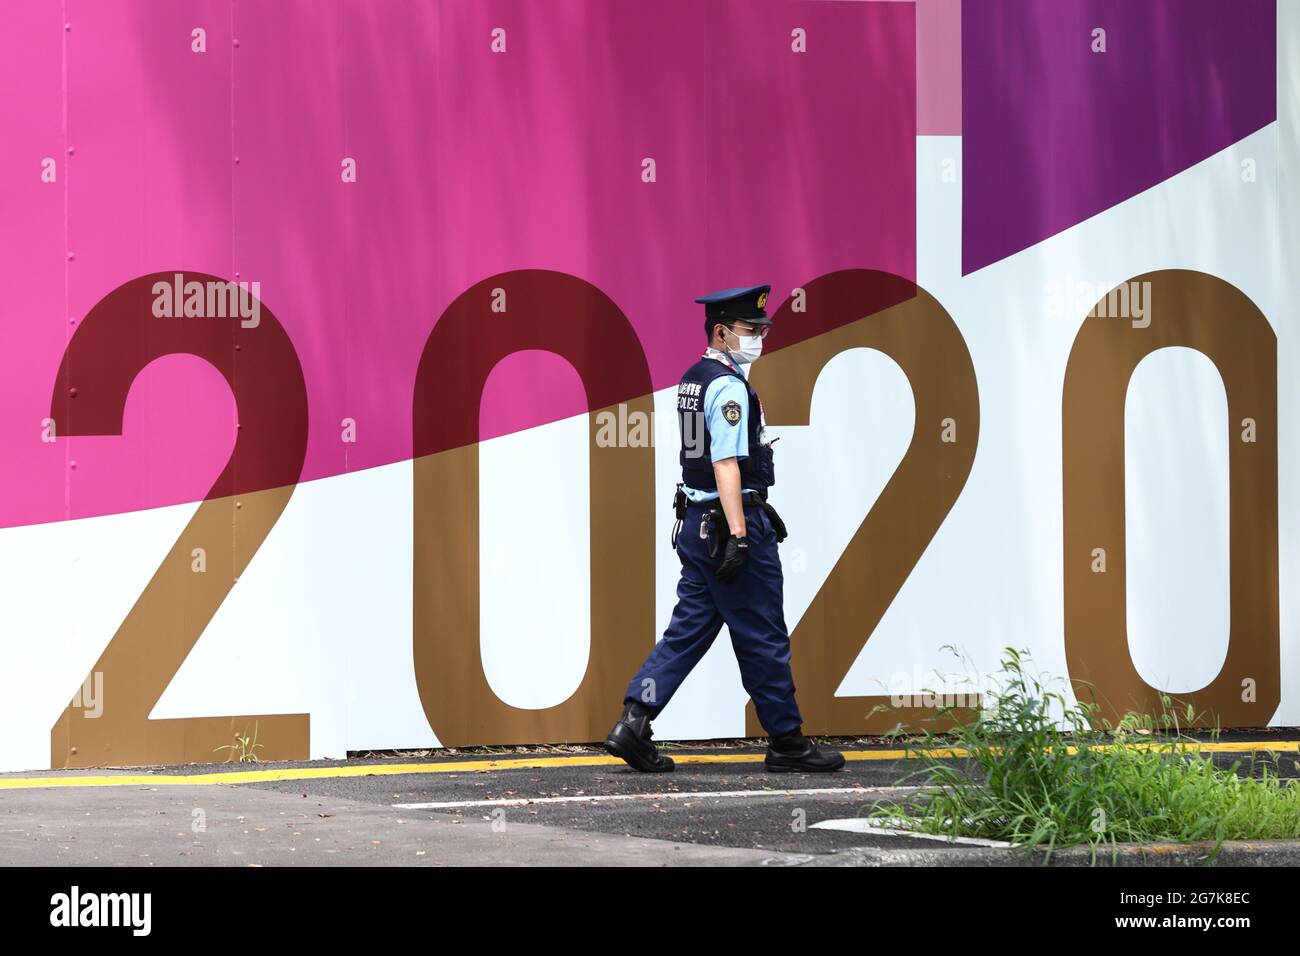 Tokyo, Japan. 14th July, 2021. A Japanese police officer is seen at Aomi area in Tokyo, Japan, July 14, 2021. Credit: Naoki Nishimura/AFLO SPORT/Alamy Live News Stock Photo